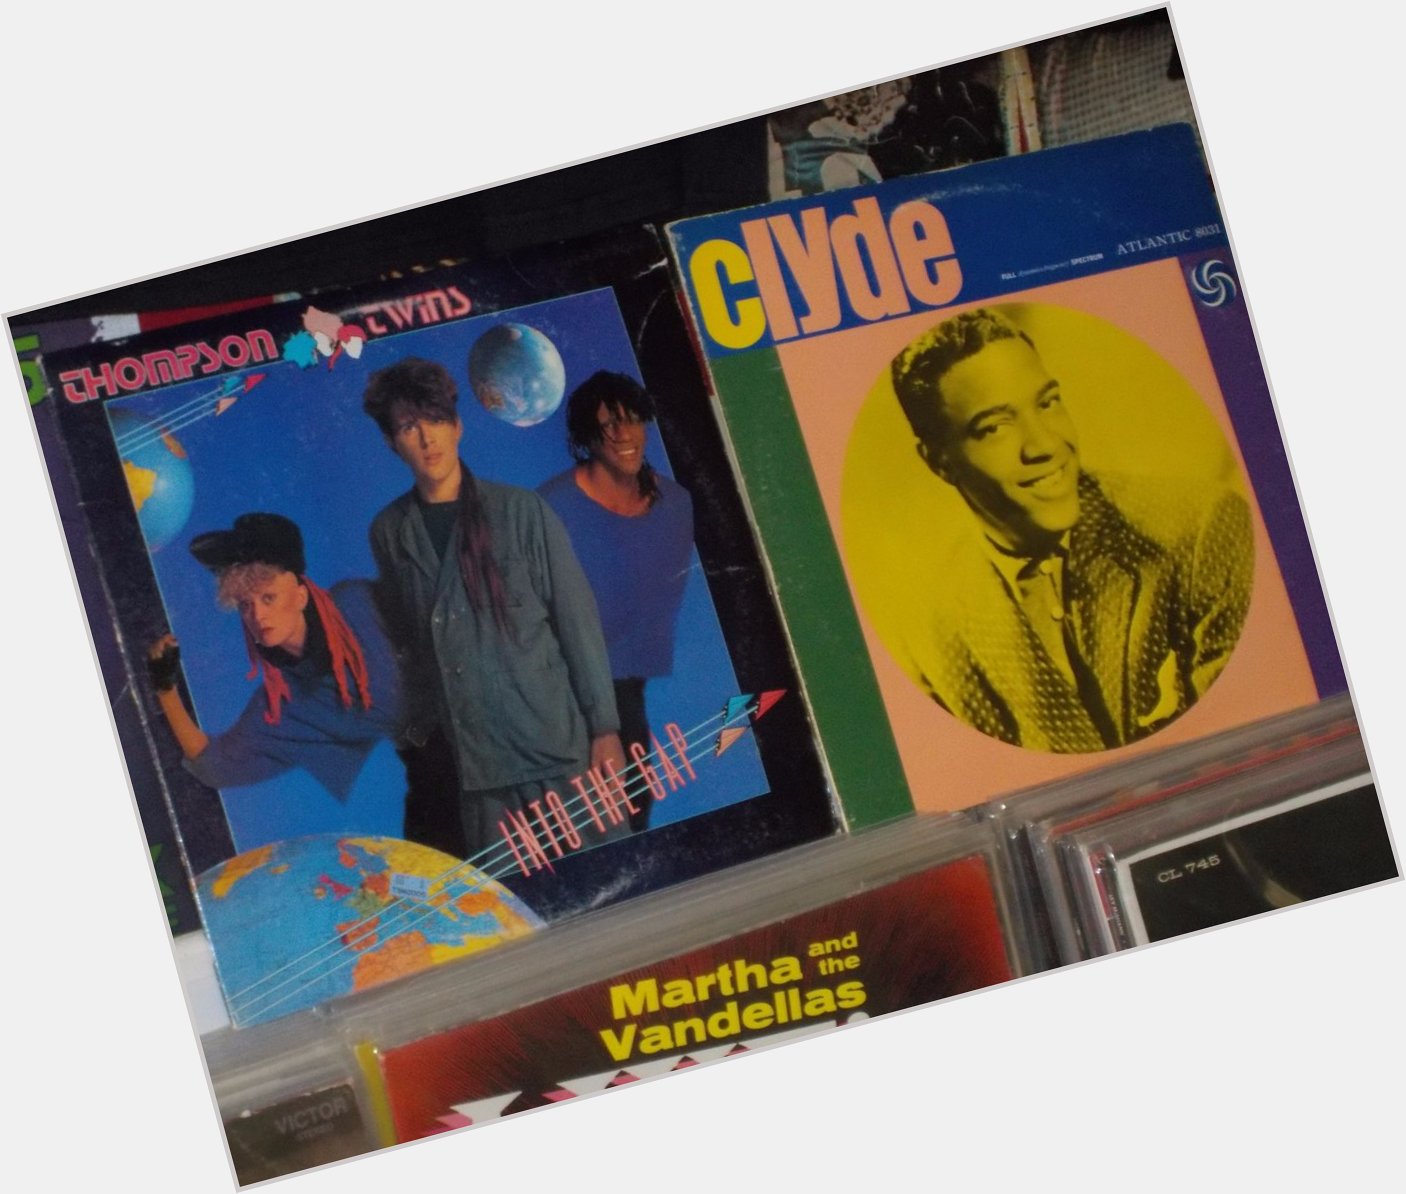 Happy Birthday to Joe Leeway of the Thompson Twins & the late Clyde McPhatter 